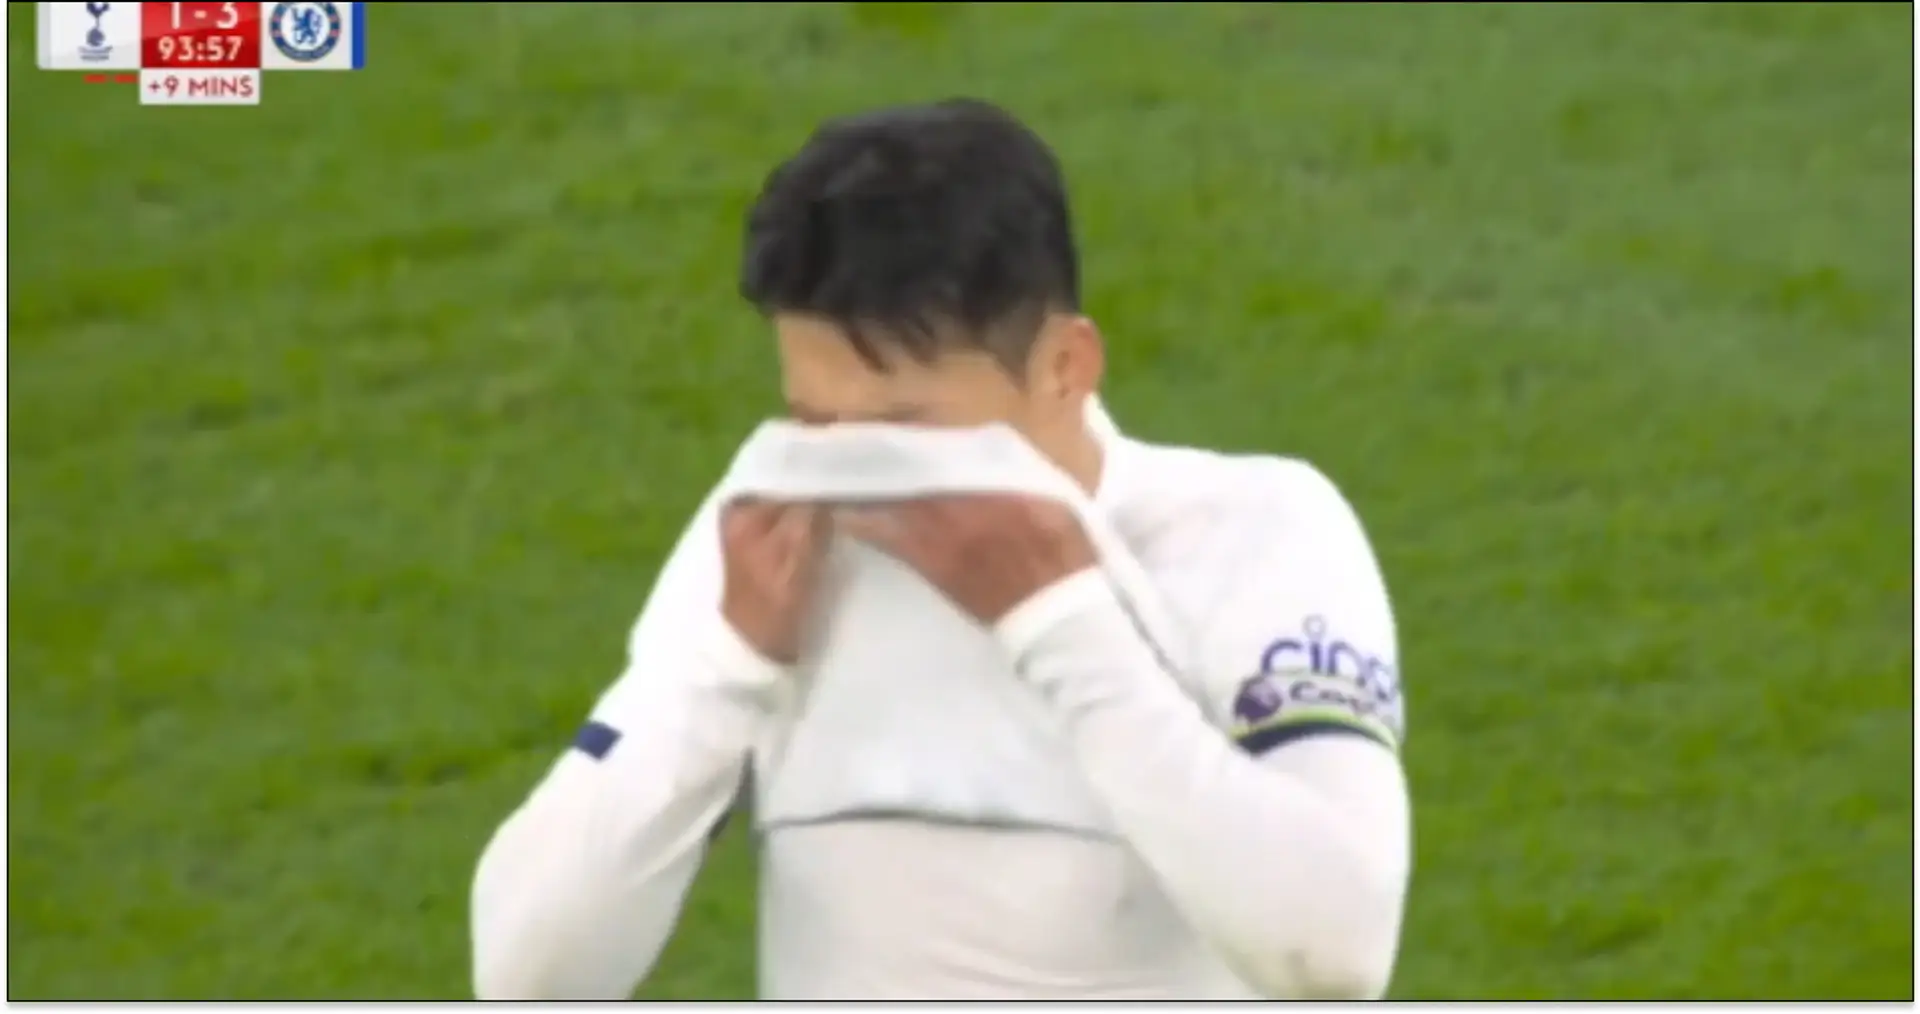 Spotted: Son on verge of tears after Jackson's second goal